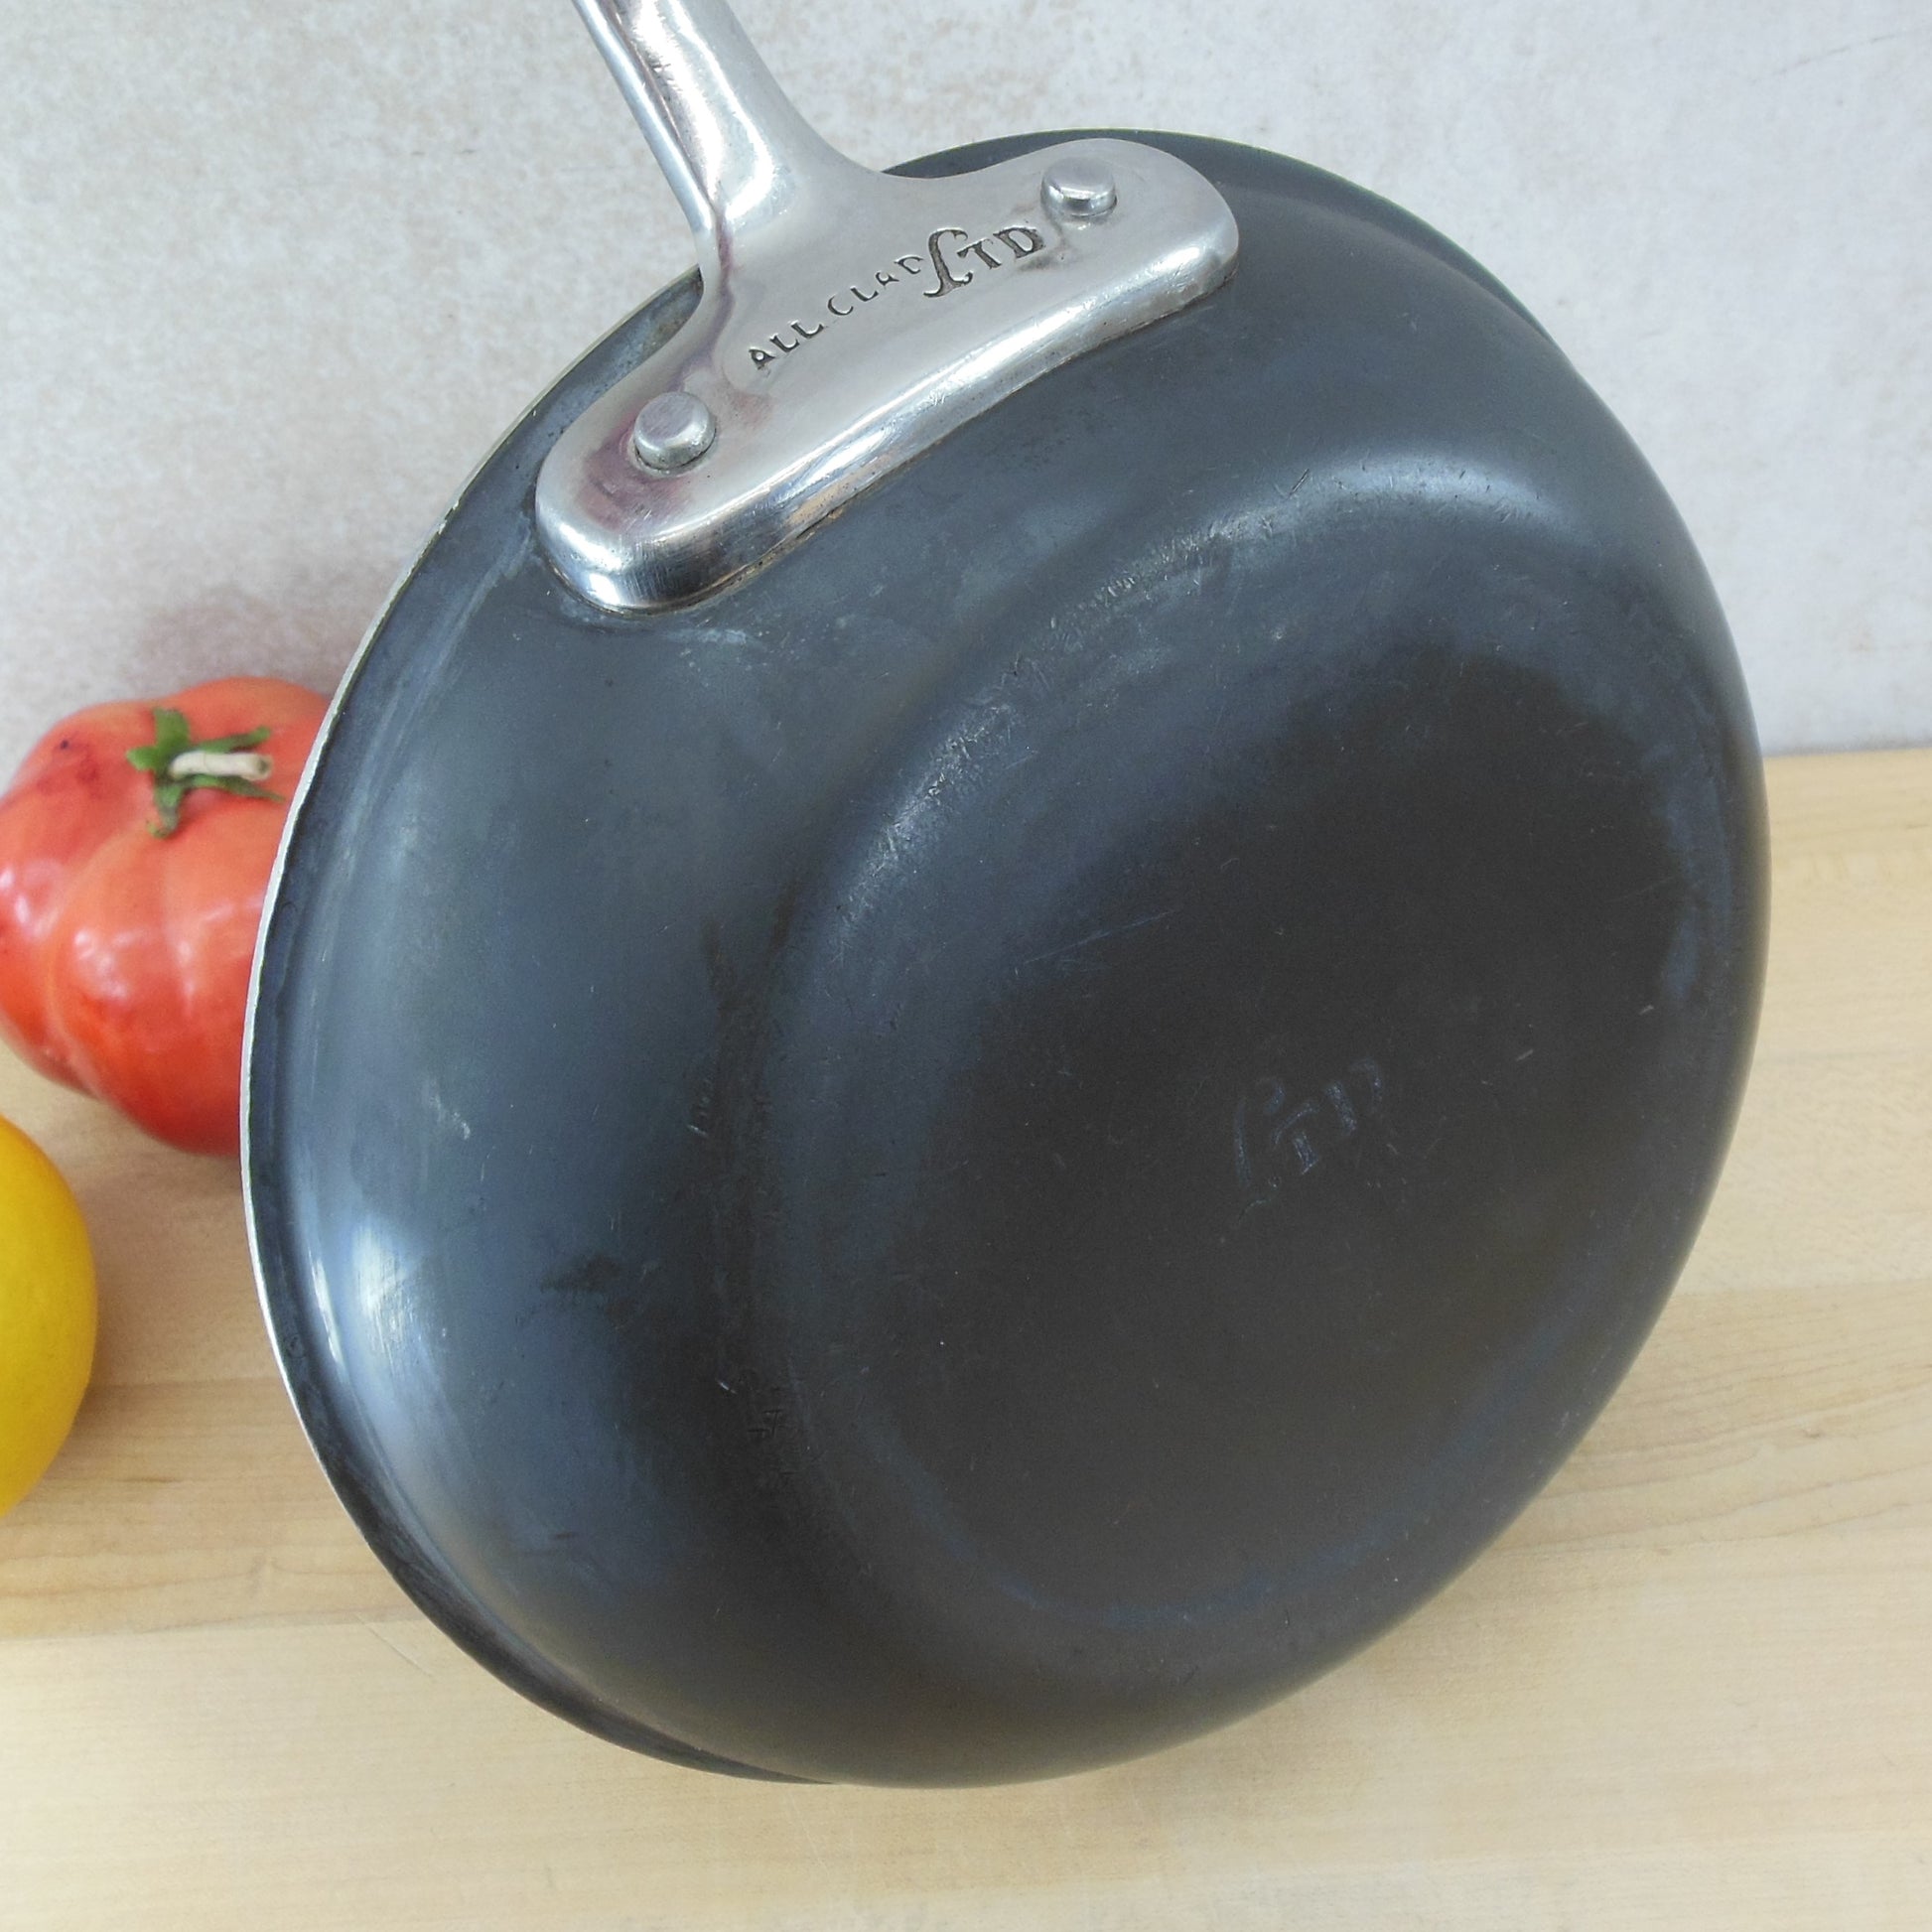 All-Clad Ltd Stainless Anodized 8.5" Fry Pan Skillet - Discounted Used